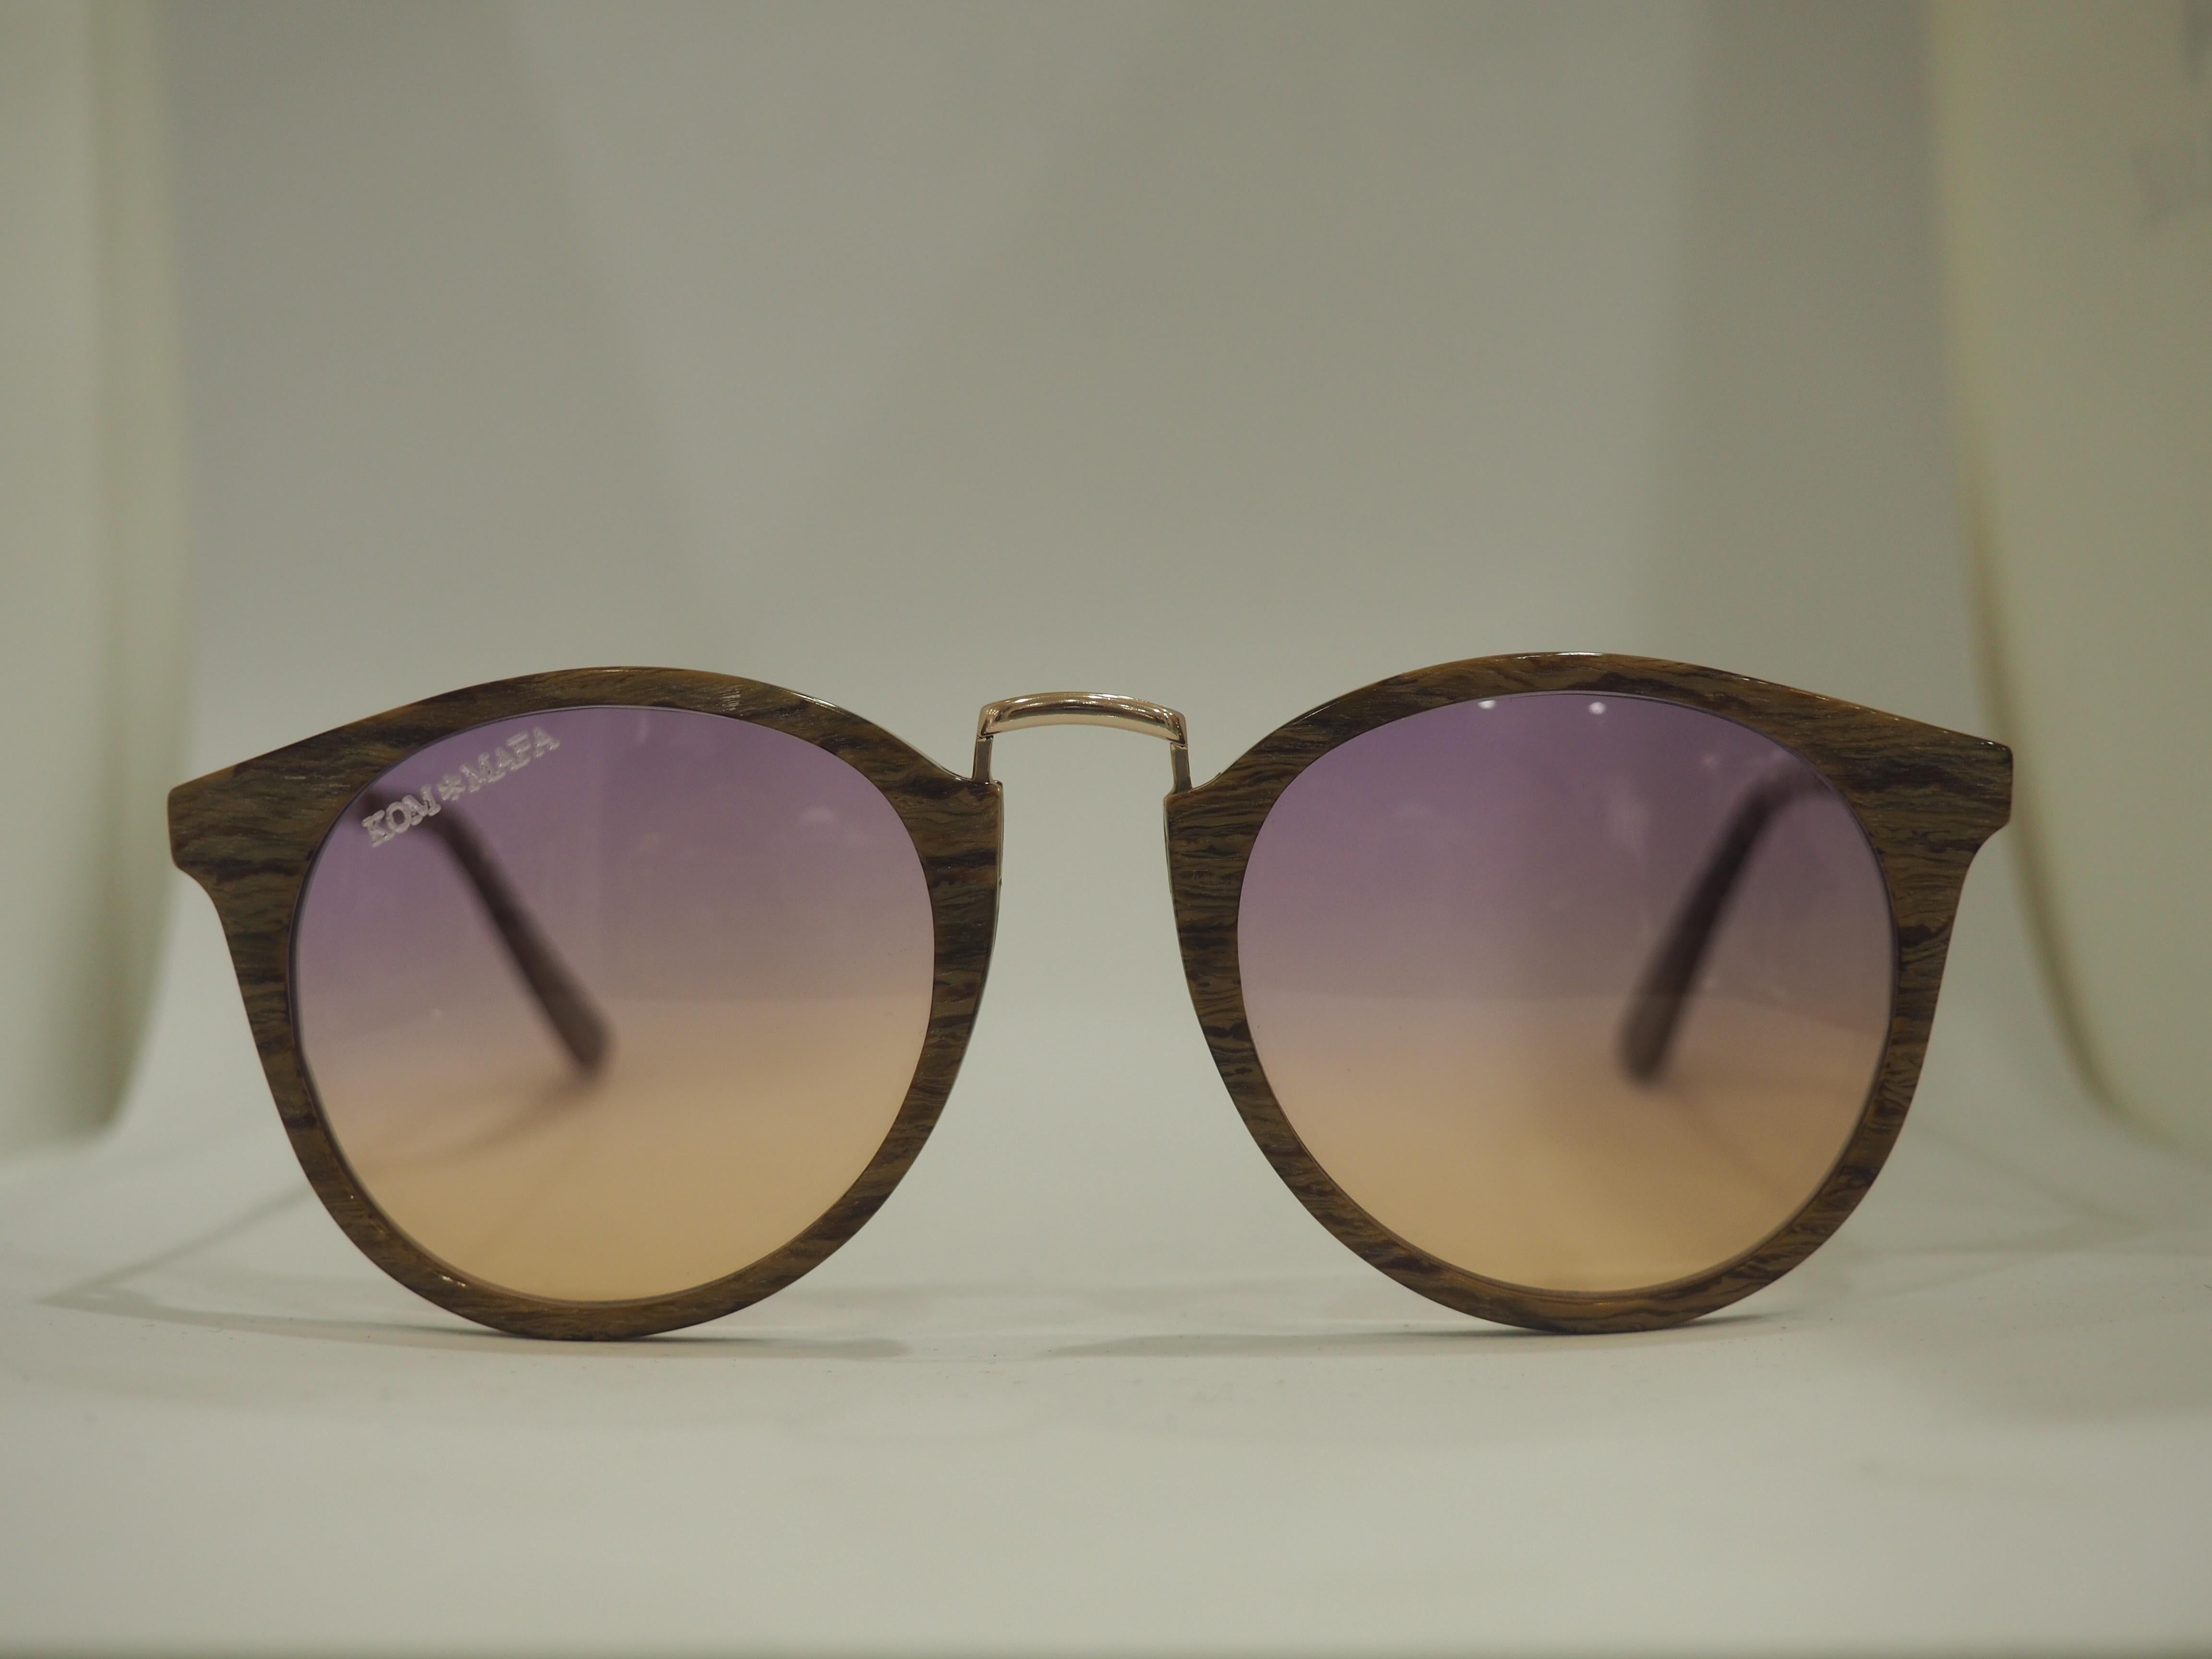 Kommafa tortoise sunglasses
totally made in italy
one of a kind